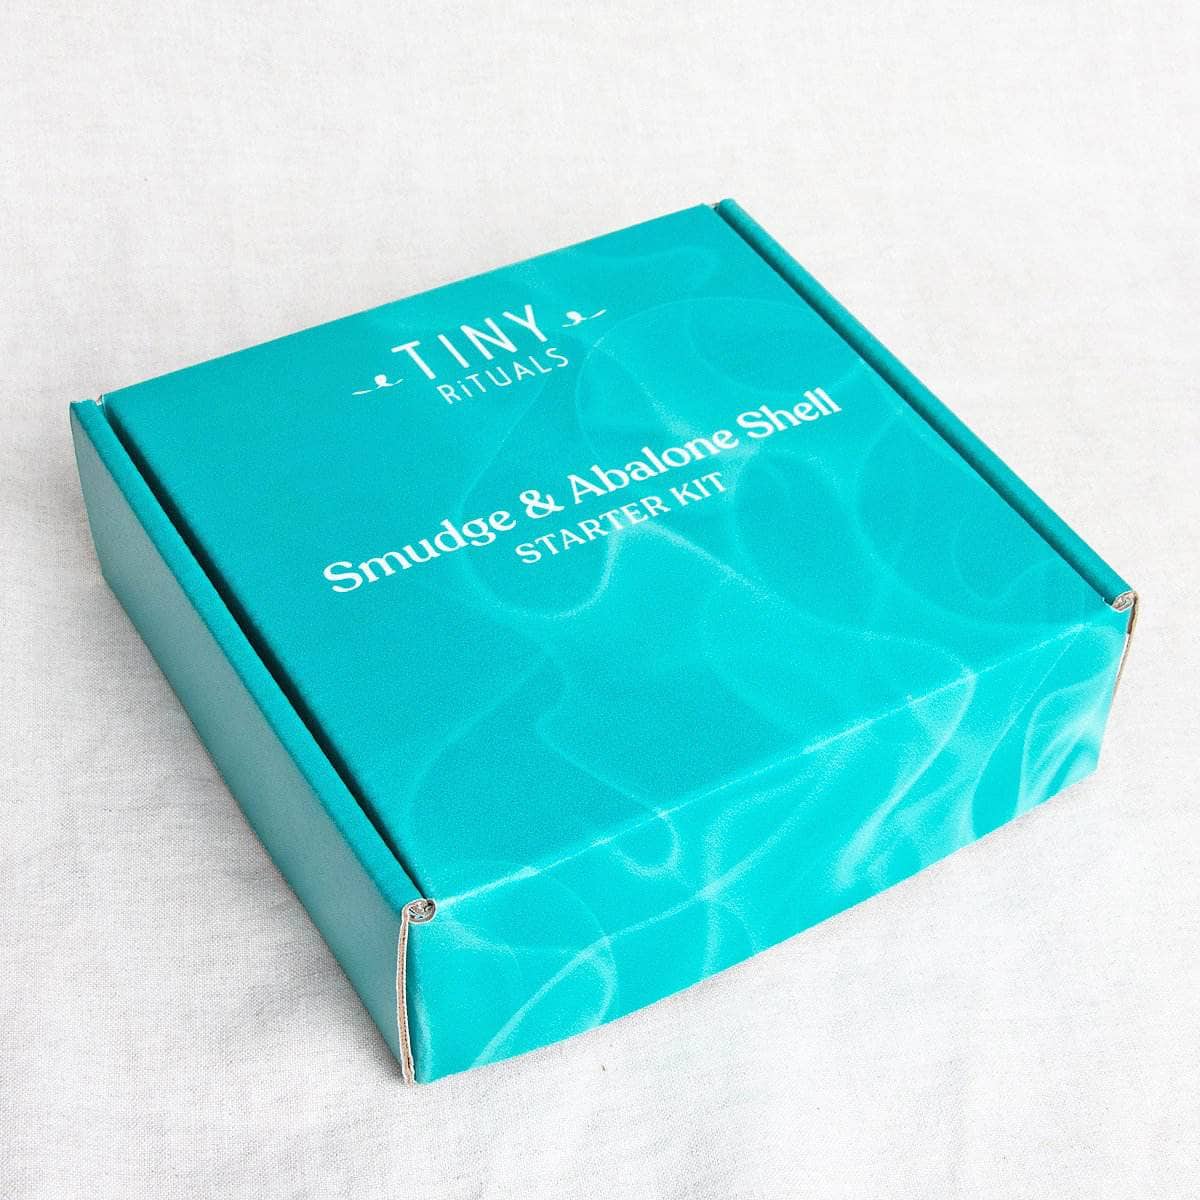  Smudge Starter Kit with Abalone Shell by Tiny Rituals Tiny Rituals Perfumarie